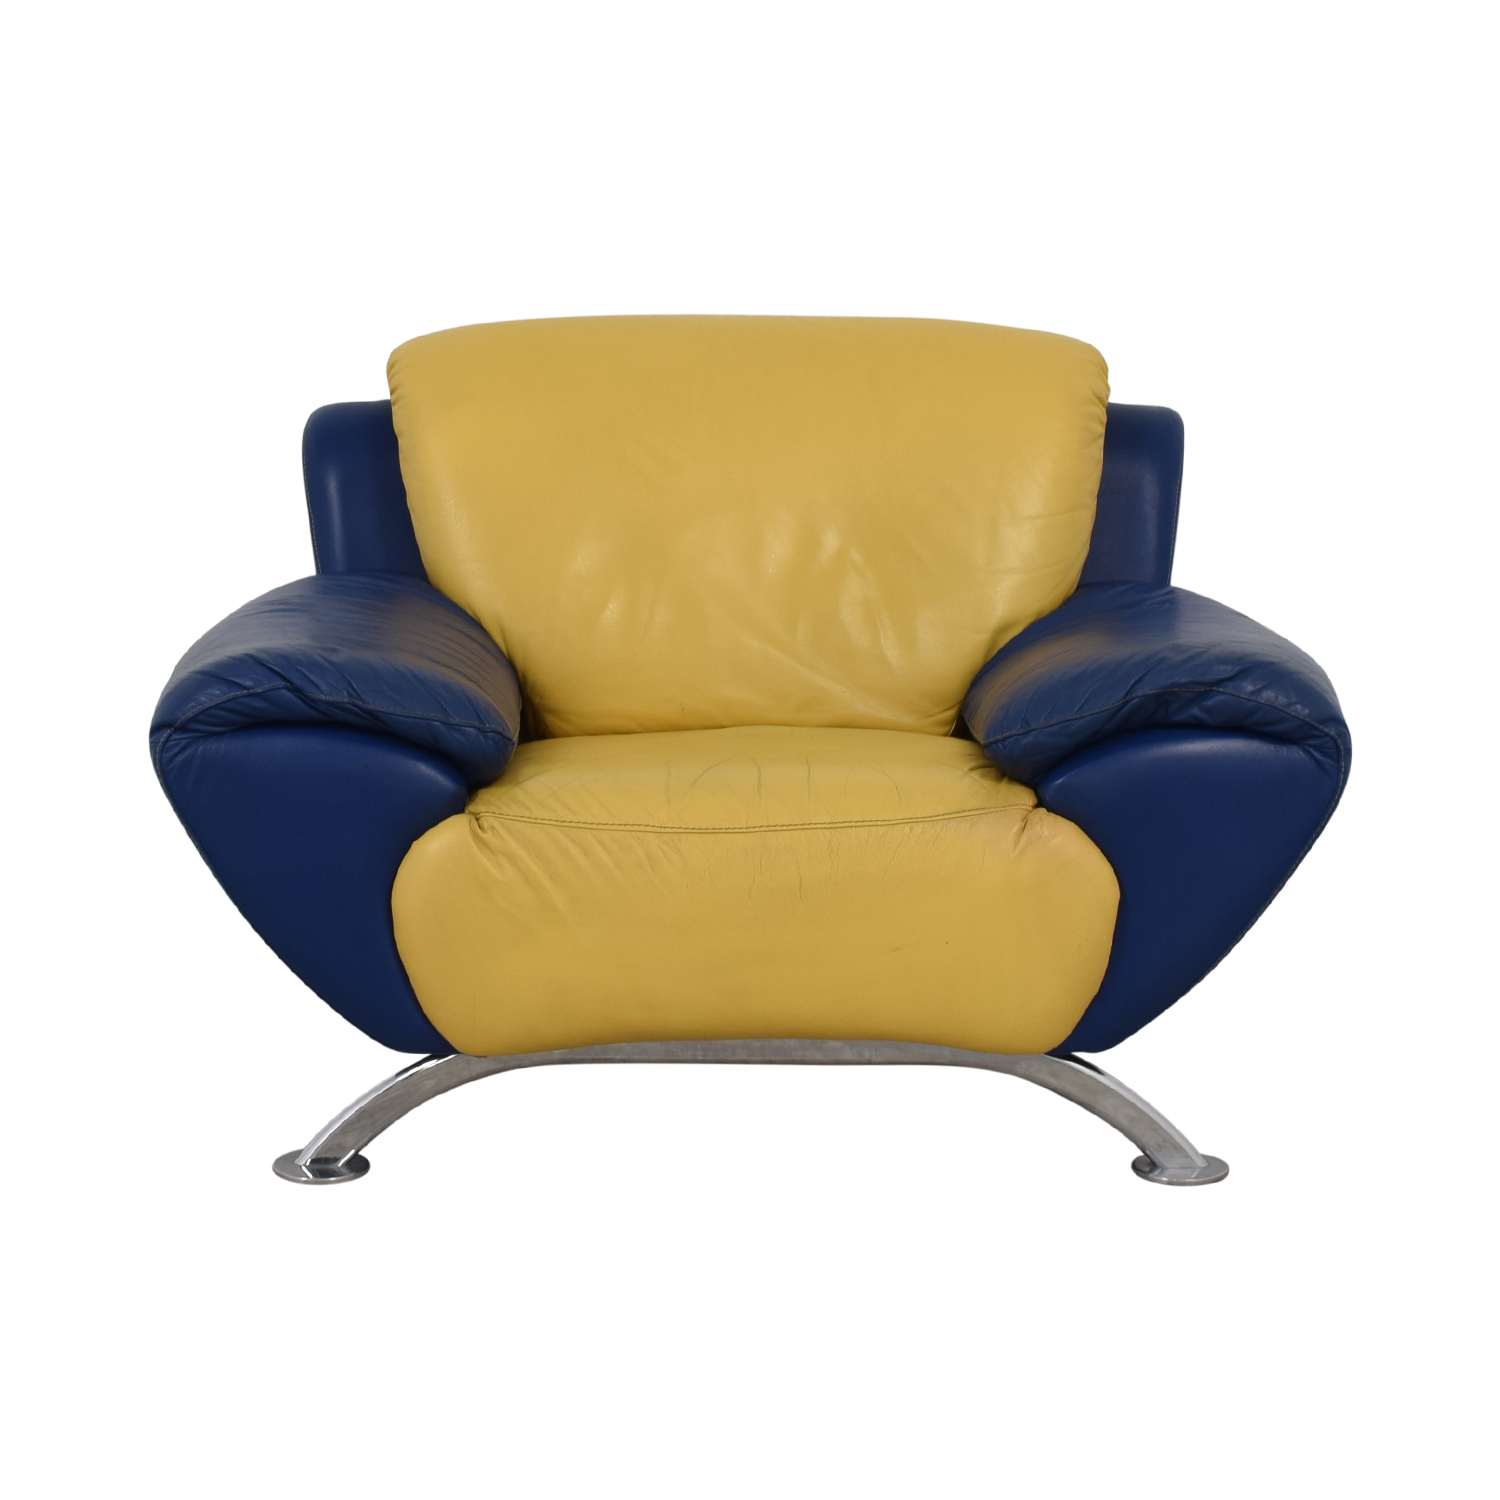 satis satis modern yellow and blue leather accent chair